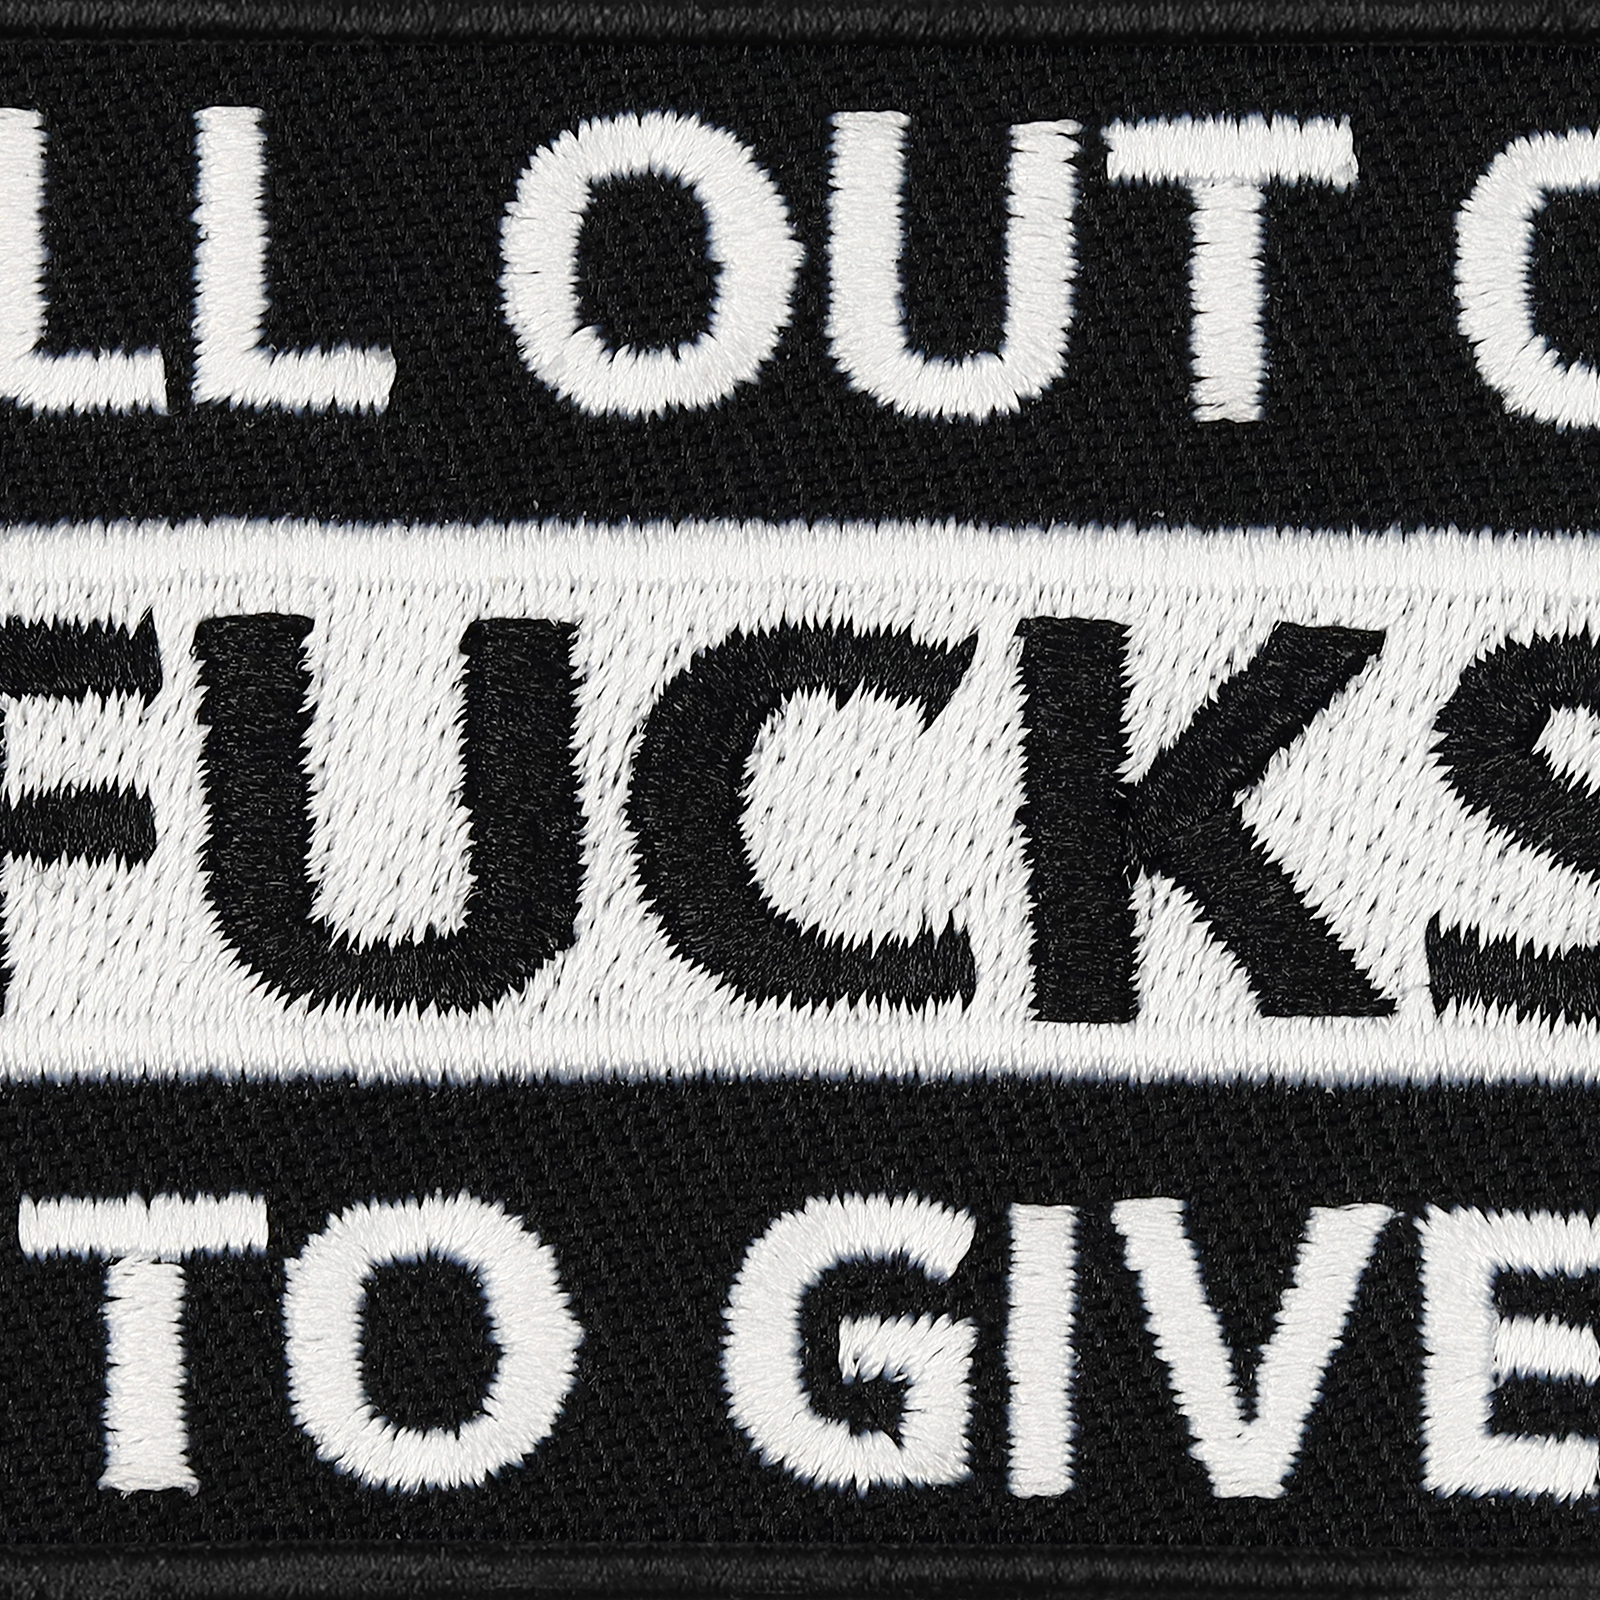 All out of fucks to give - Patch